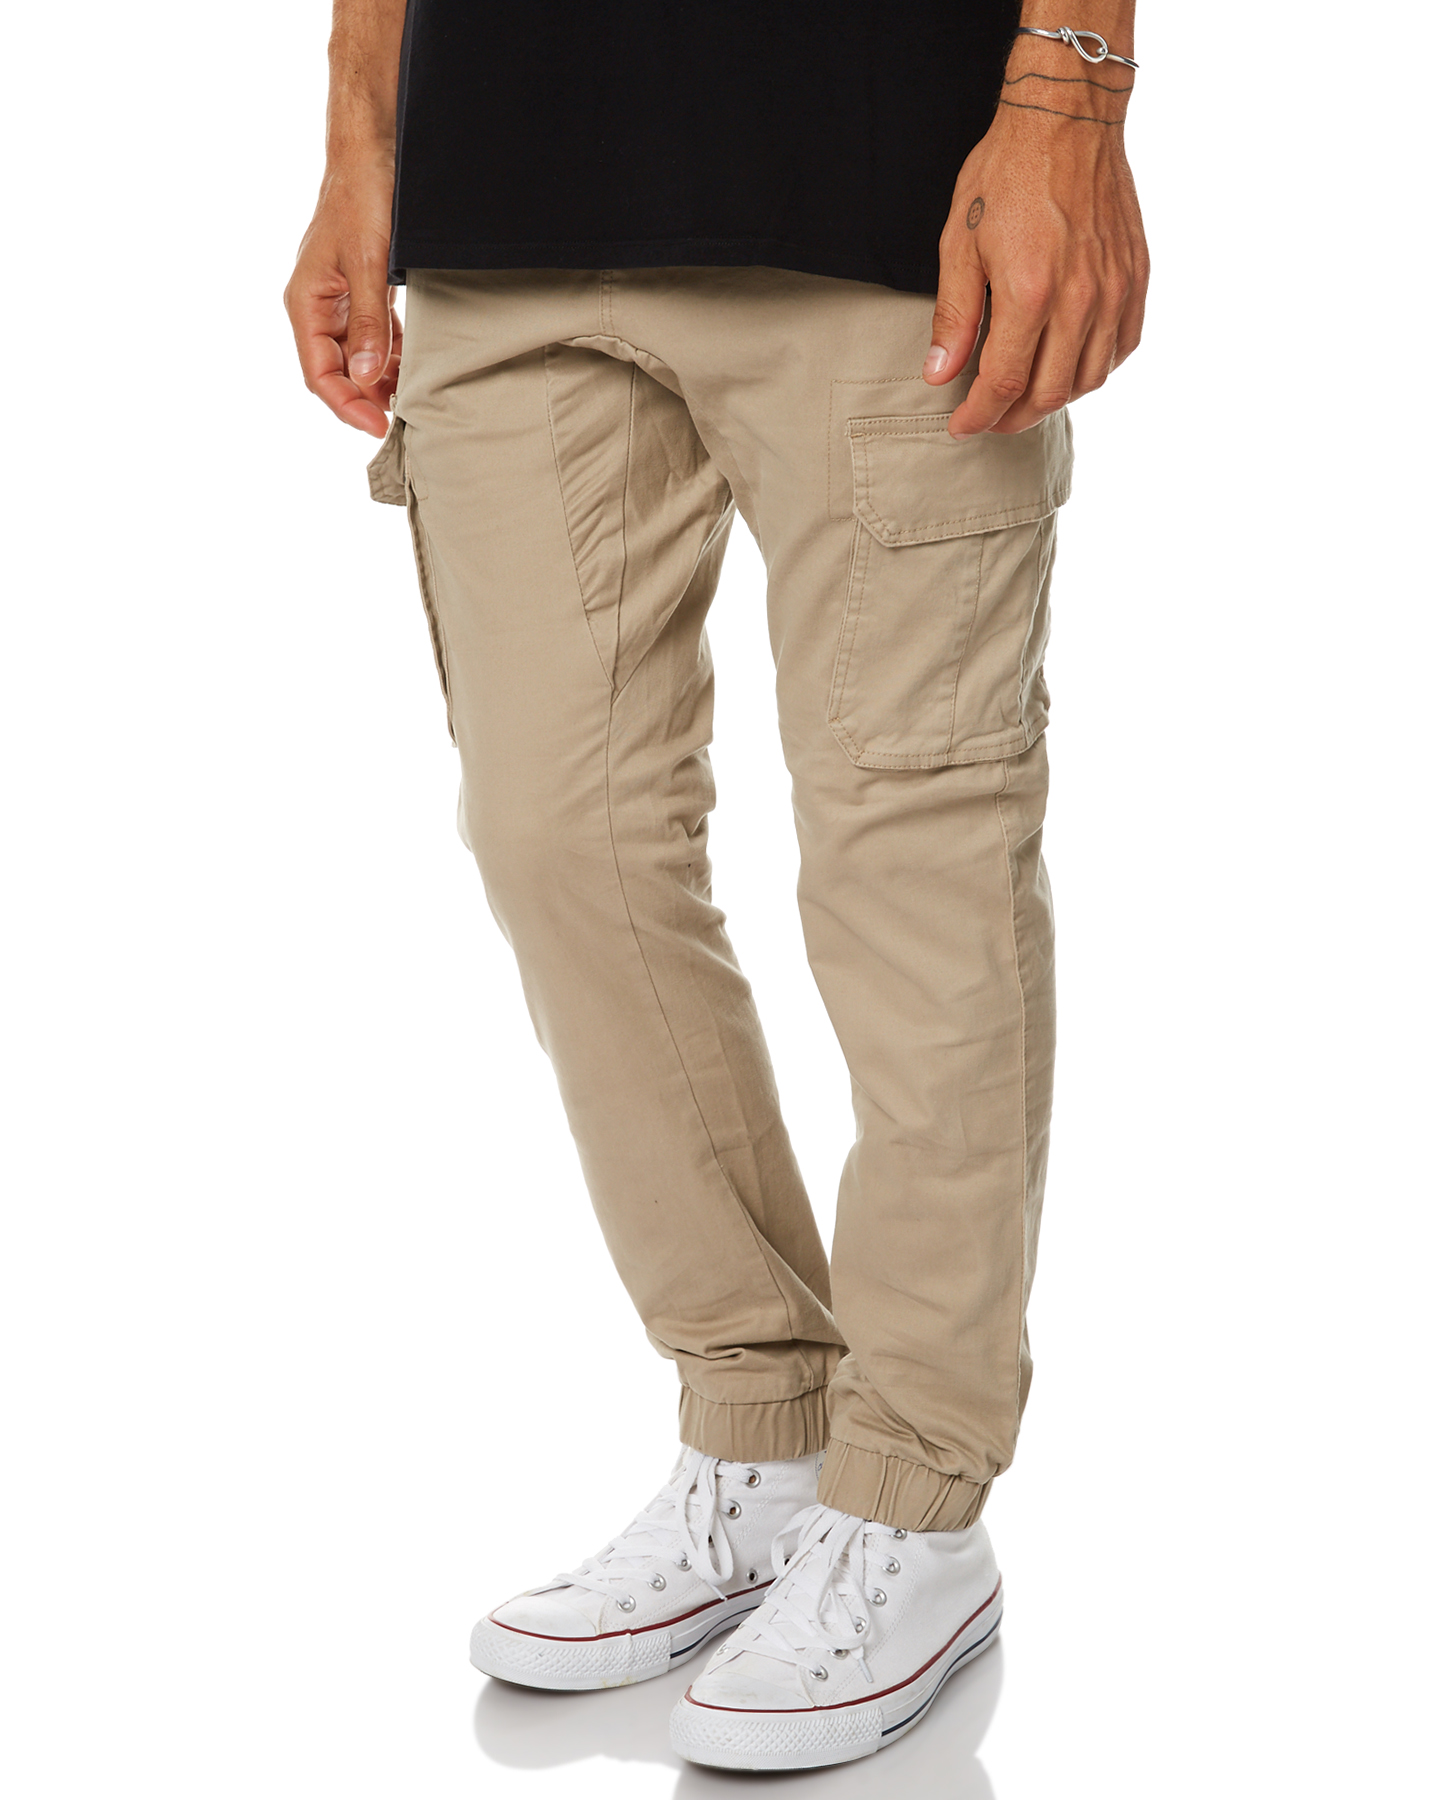 Swell Blunt Mens Cargo Jogger Pant - Khaki | SurfStitch